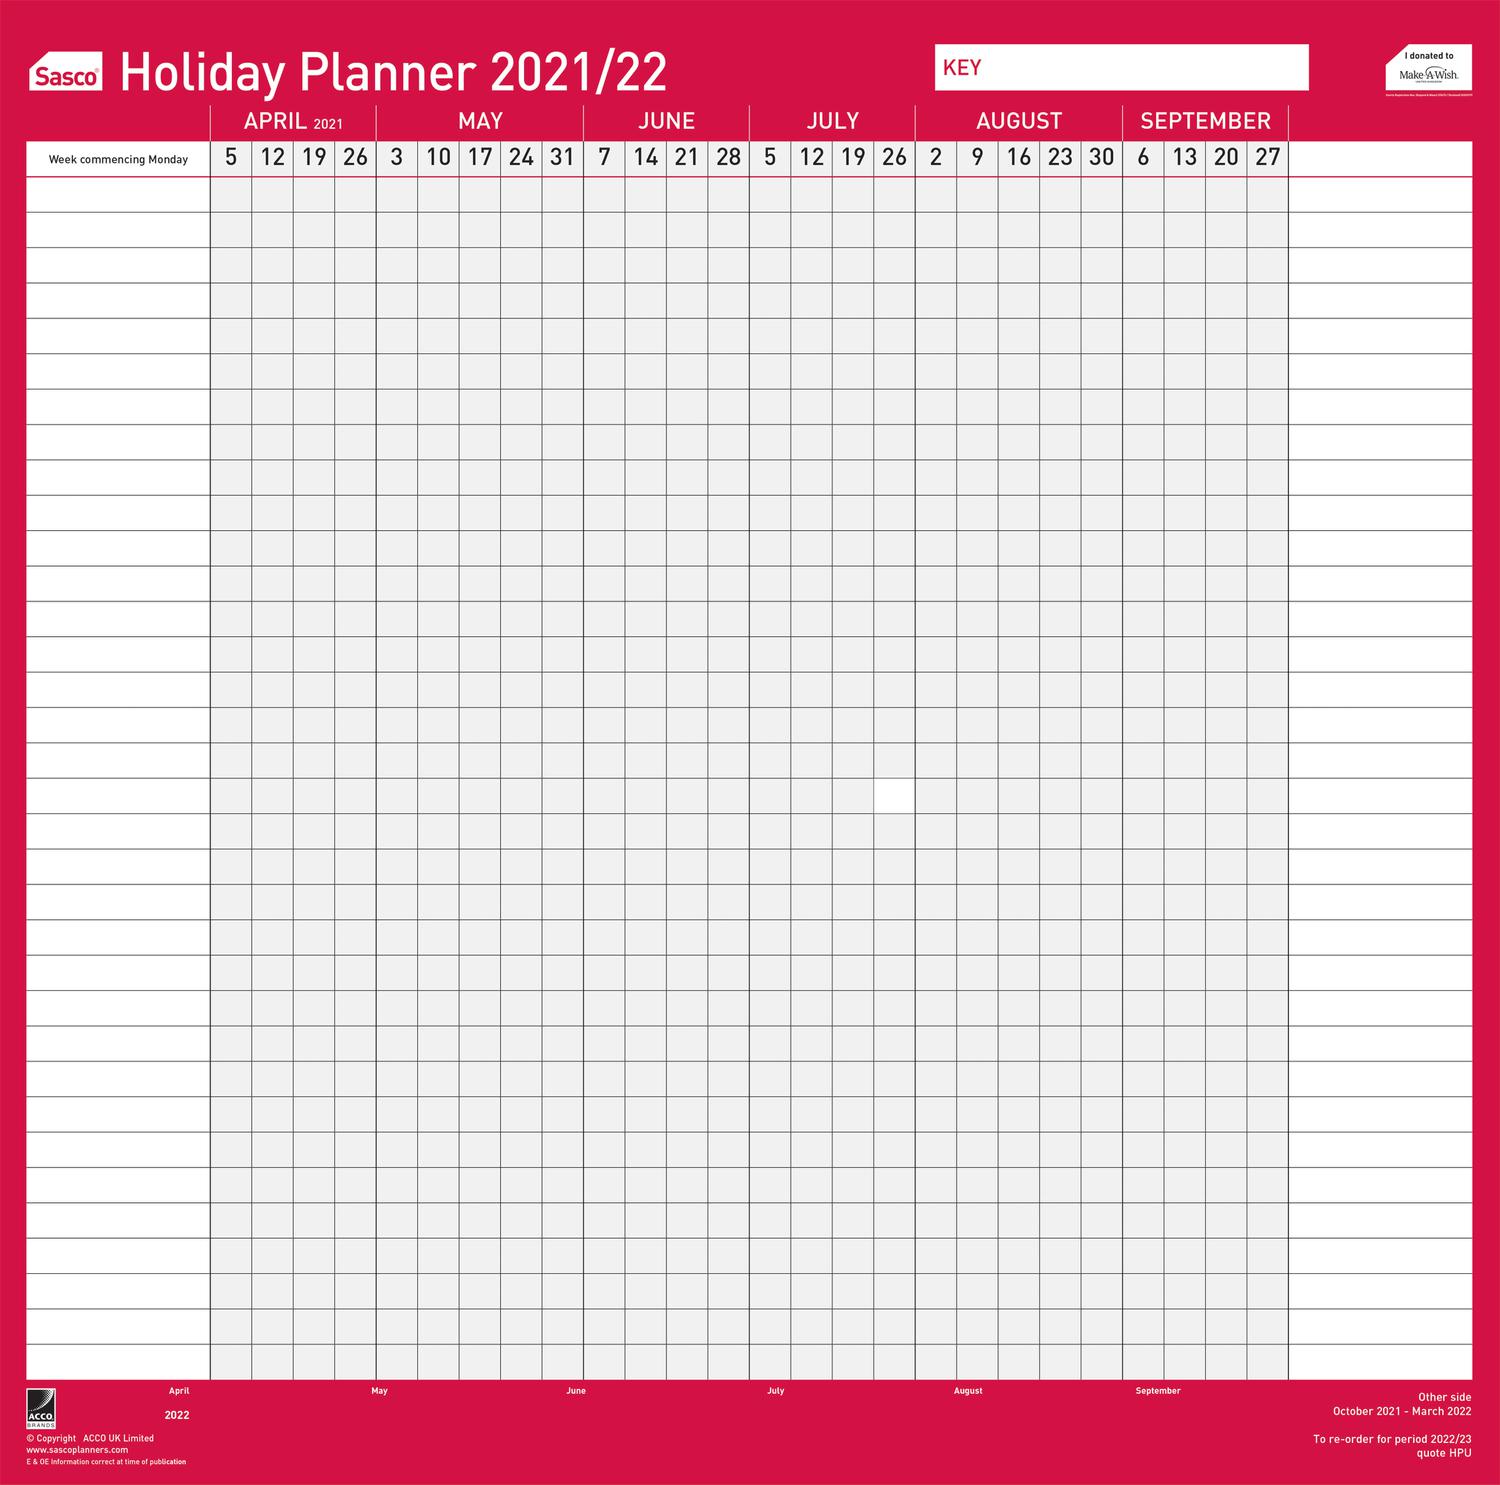 Sasco Holiday Planner Unmounted 2021 (Pack 10)